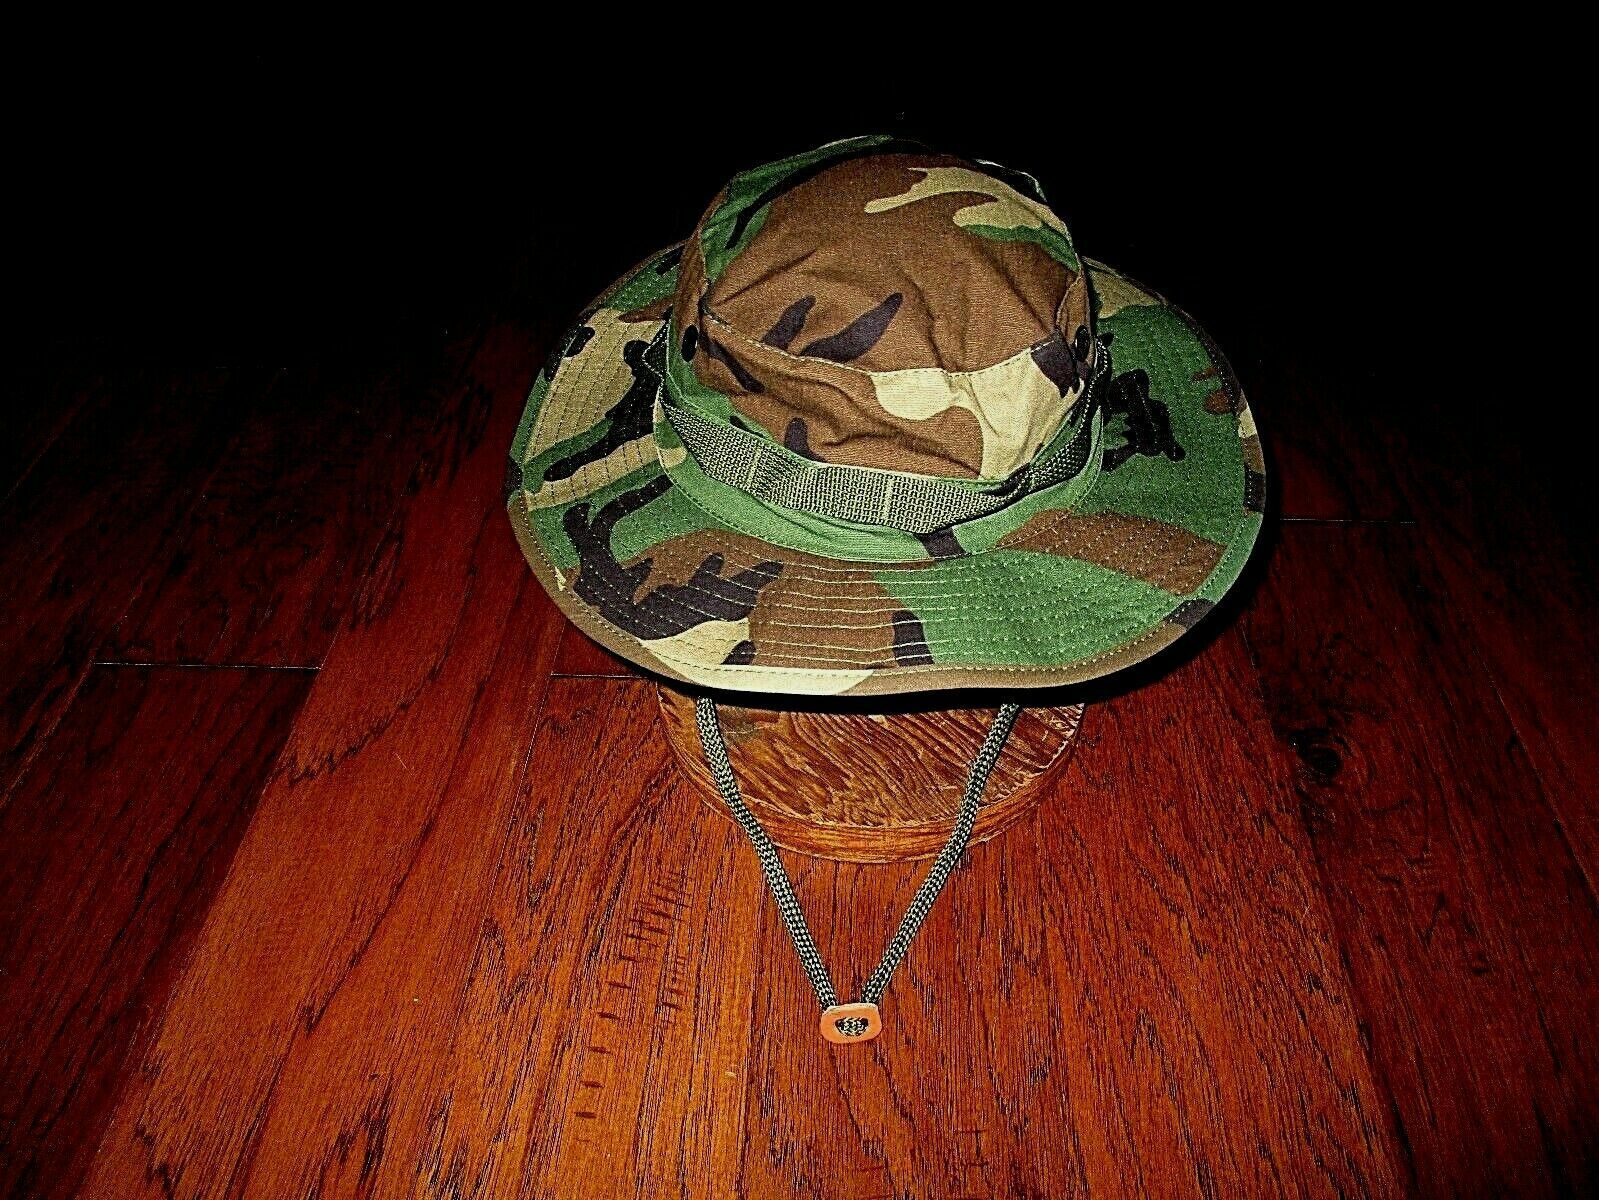 US Army Boonie Hat Sun Hot Weather Type II 0423-41-082-7360 Camo Size 7-3/4 海外  即決 - スキル、知識